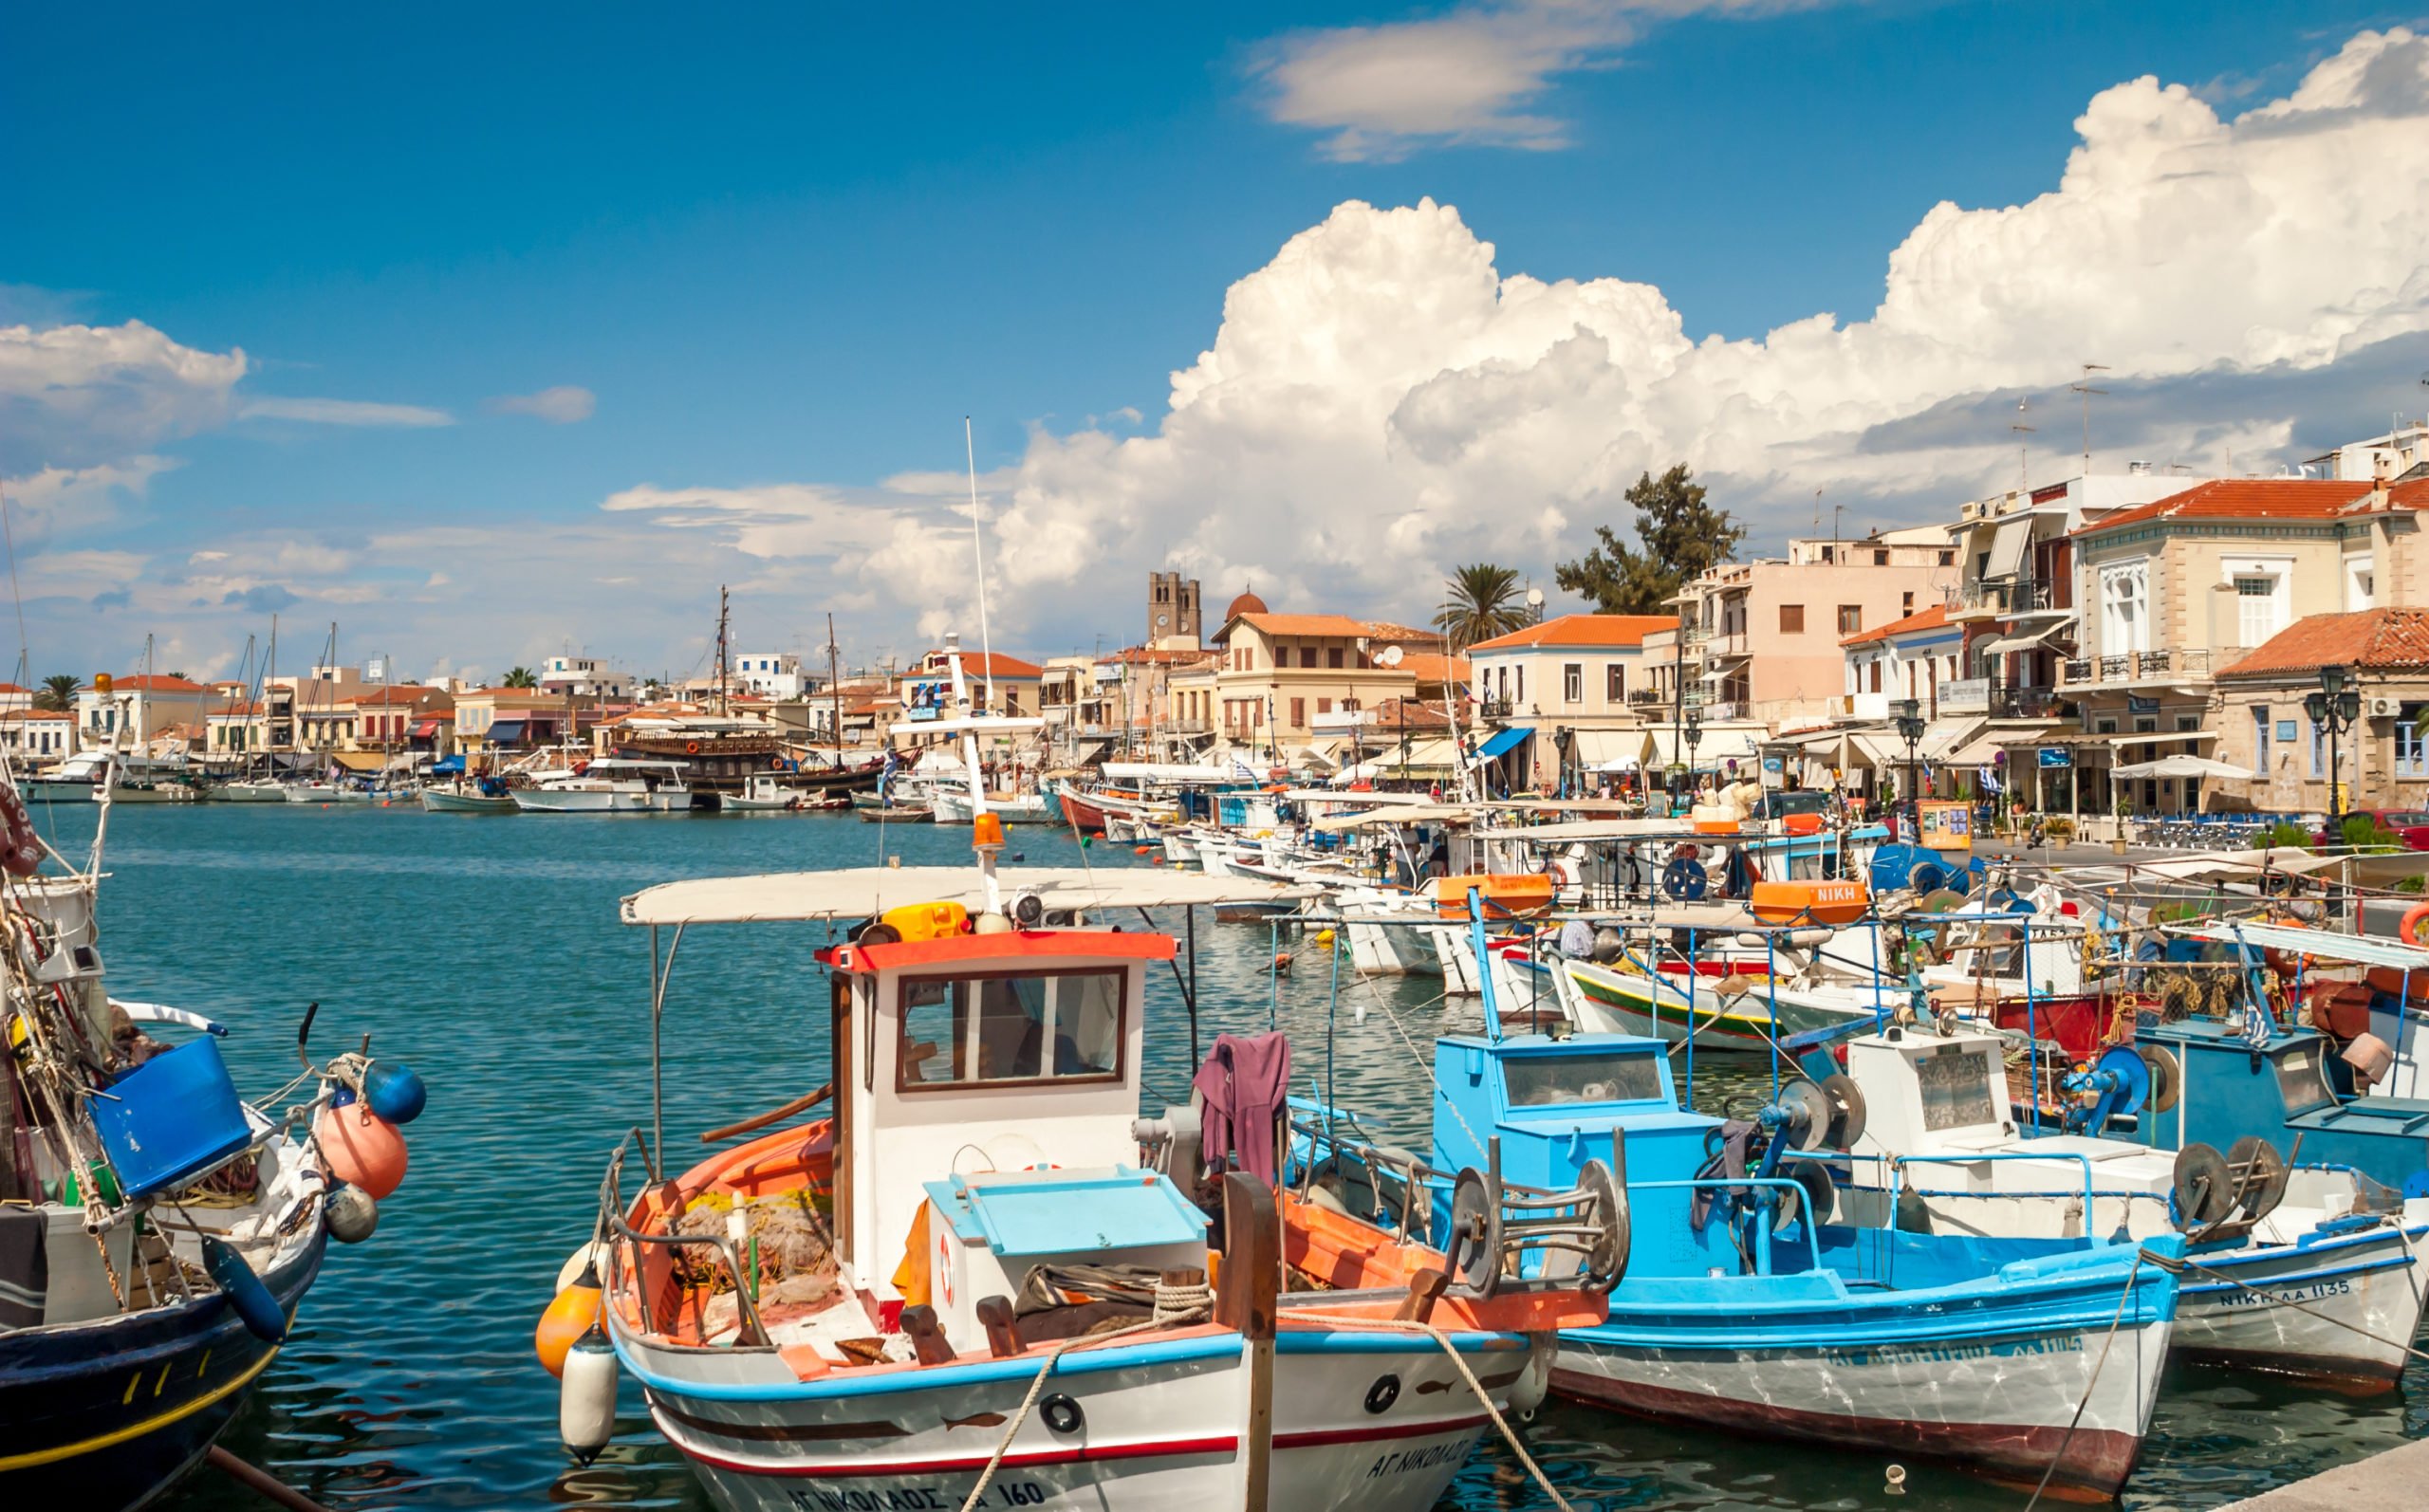 Explore The Picturesque Island Of Aegina On The Aegina, Poros And Hydra Cruise From Athens